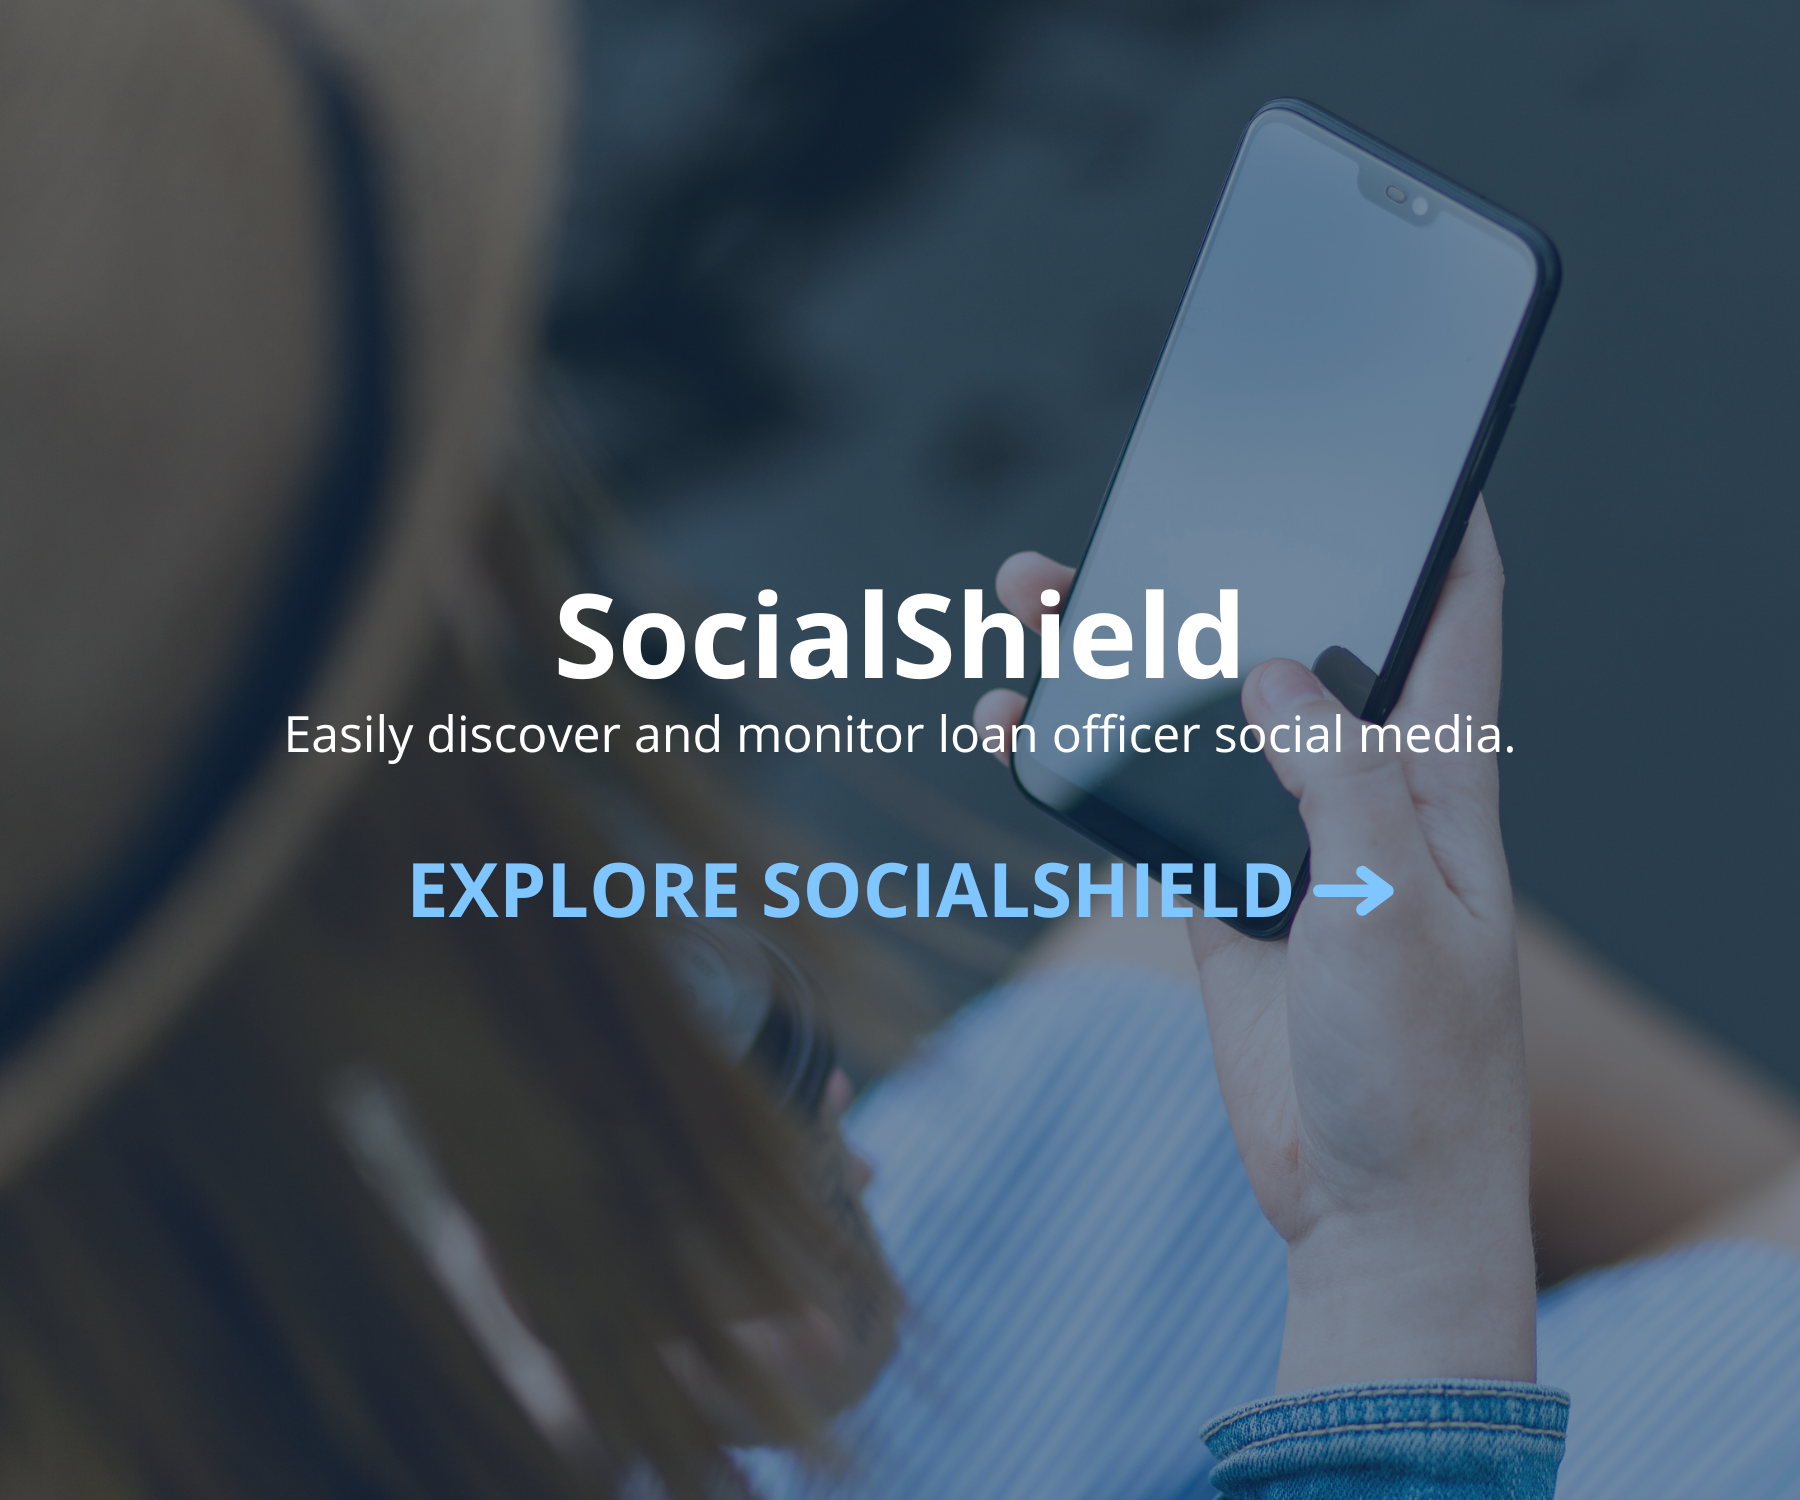 Download ActiveComply's LO Cheat Sheet for Social Media Compliance.